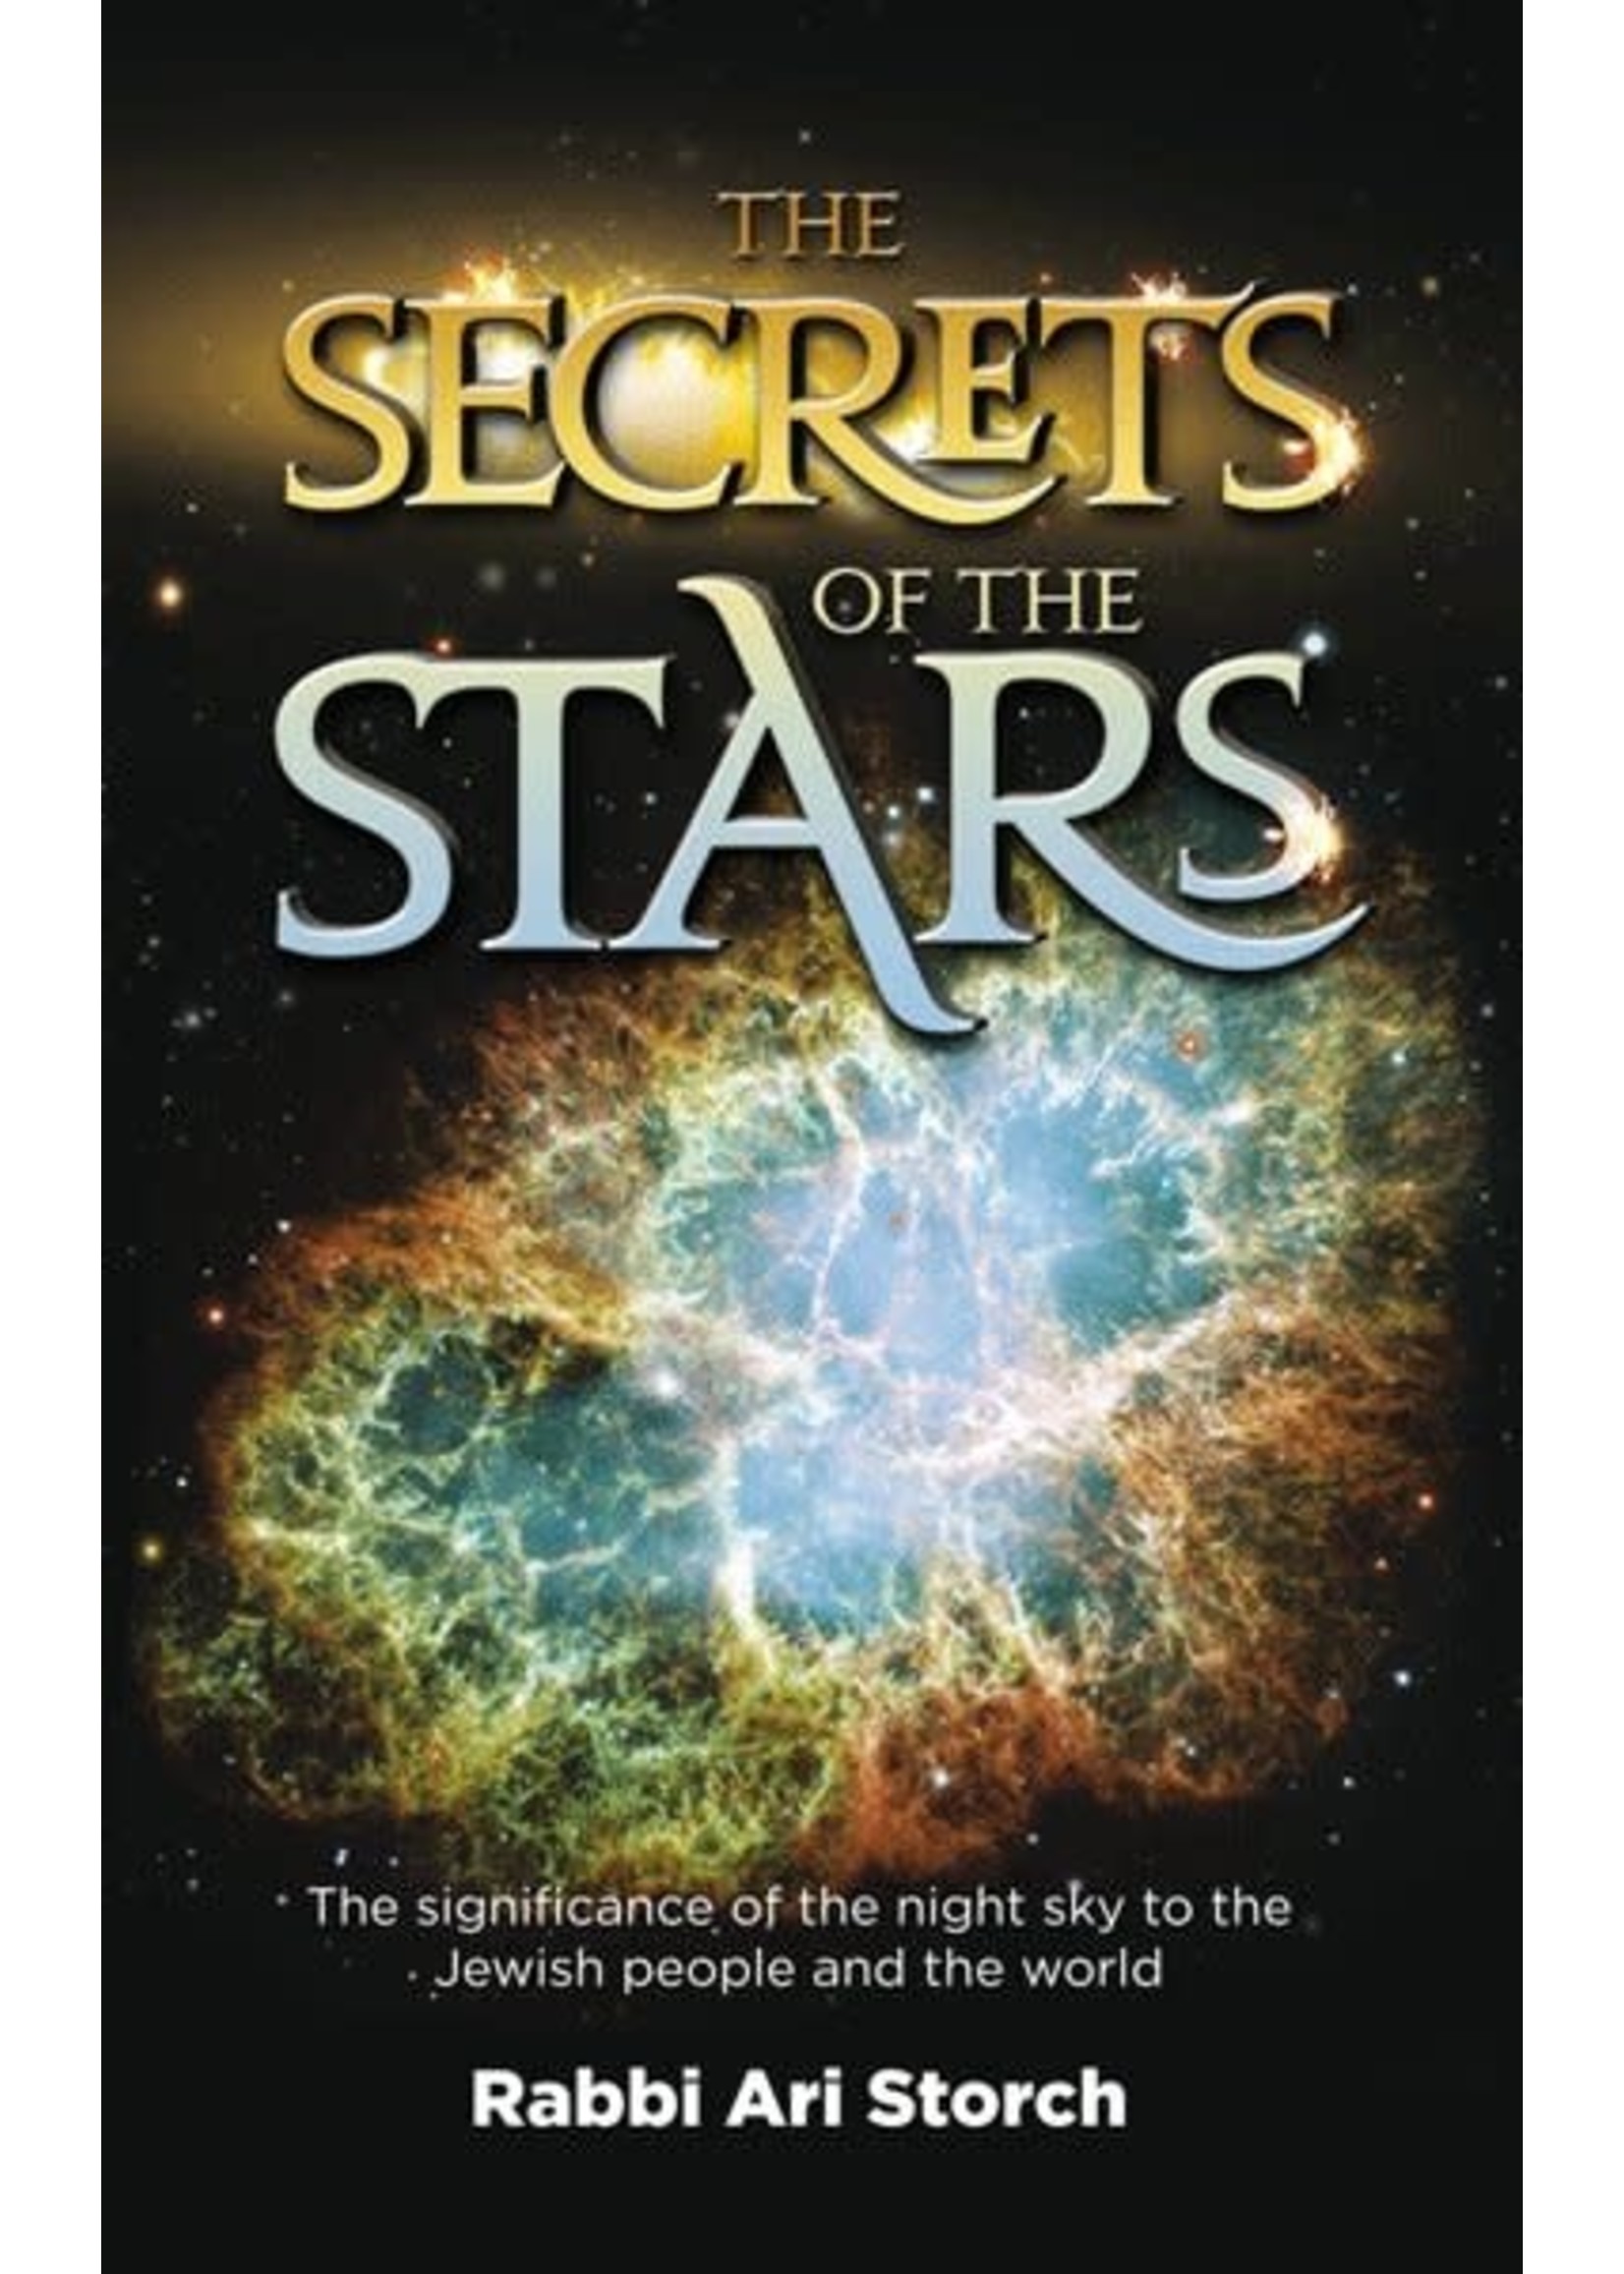 THE SECRETS OF THE STARS